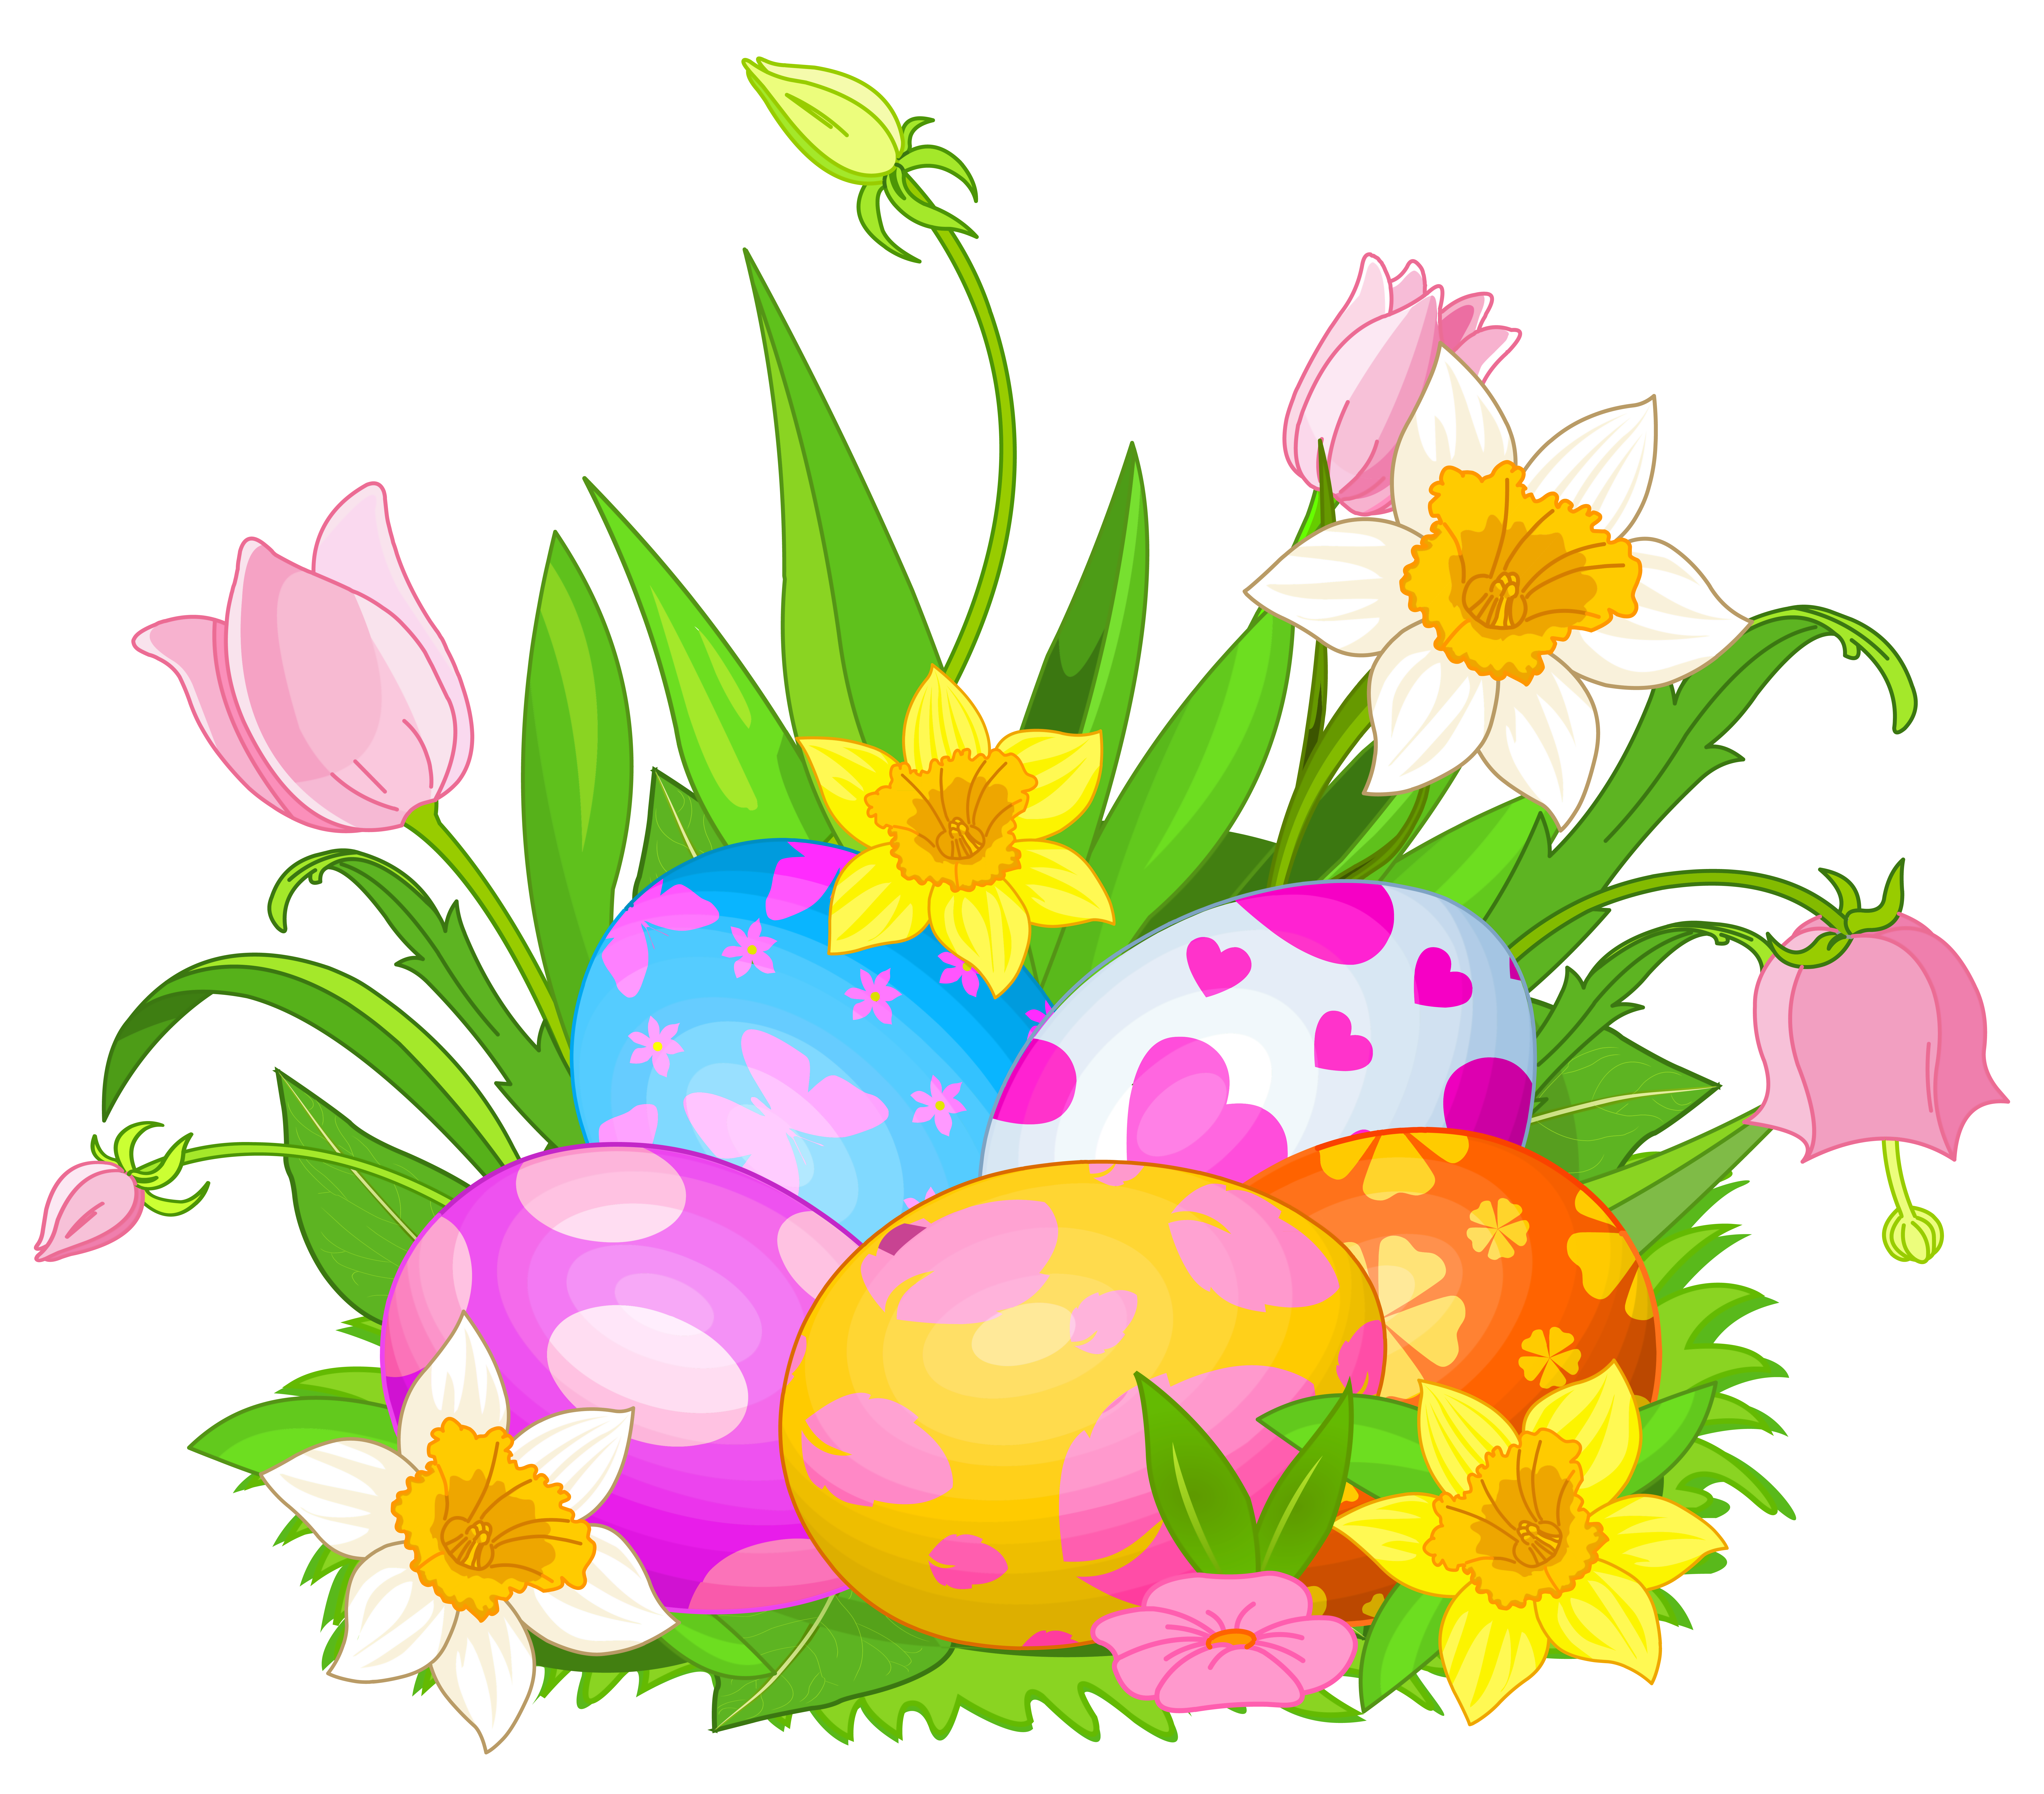 Free Easter Flowers Cliparts, Download Free Clip Art, Free Clip Art.